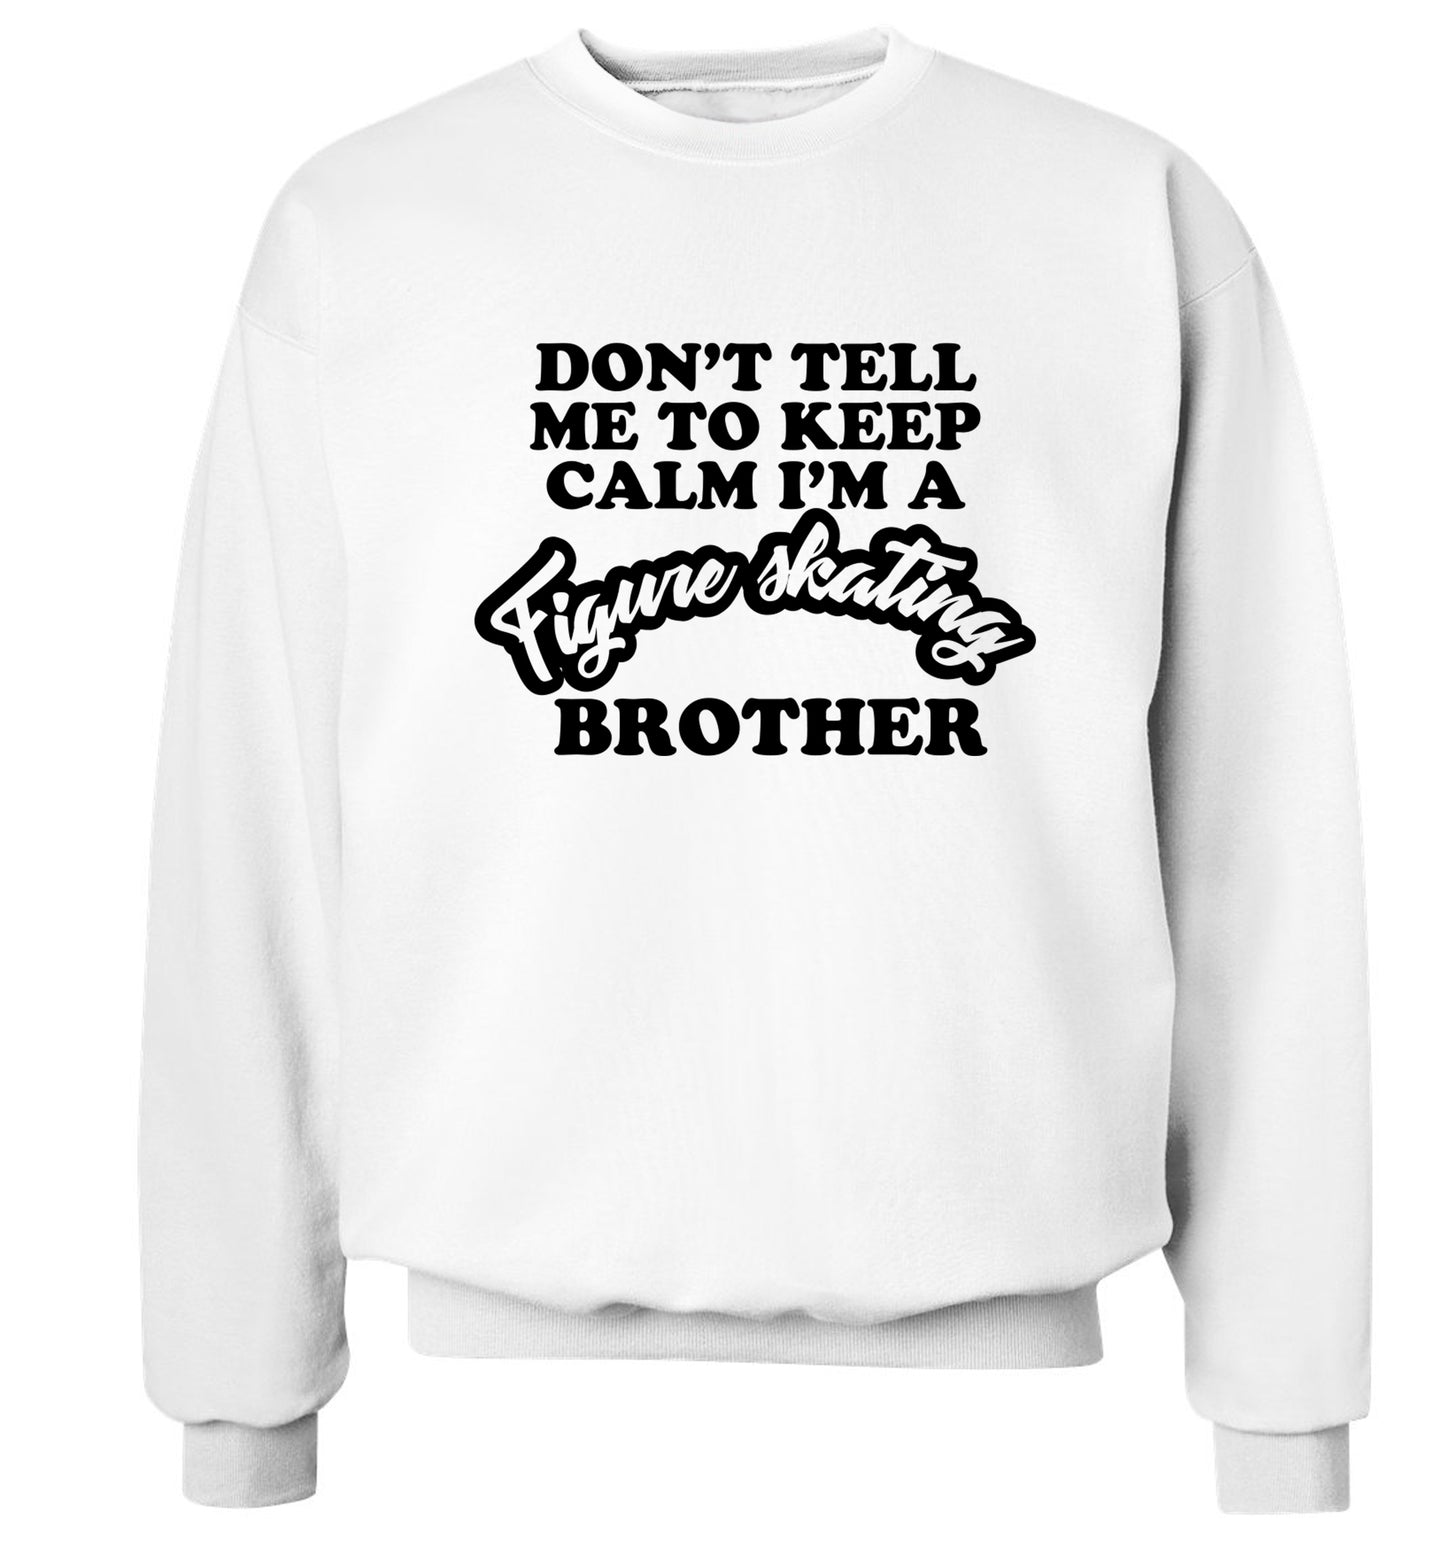 Don't tell me to keep calm I'm a figure skating brother Adult's unisexwhite Sweater 2XL